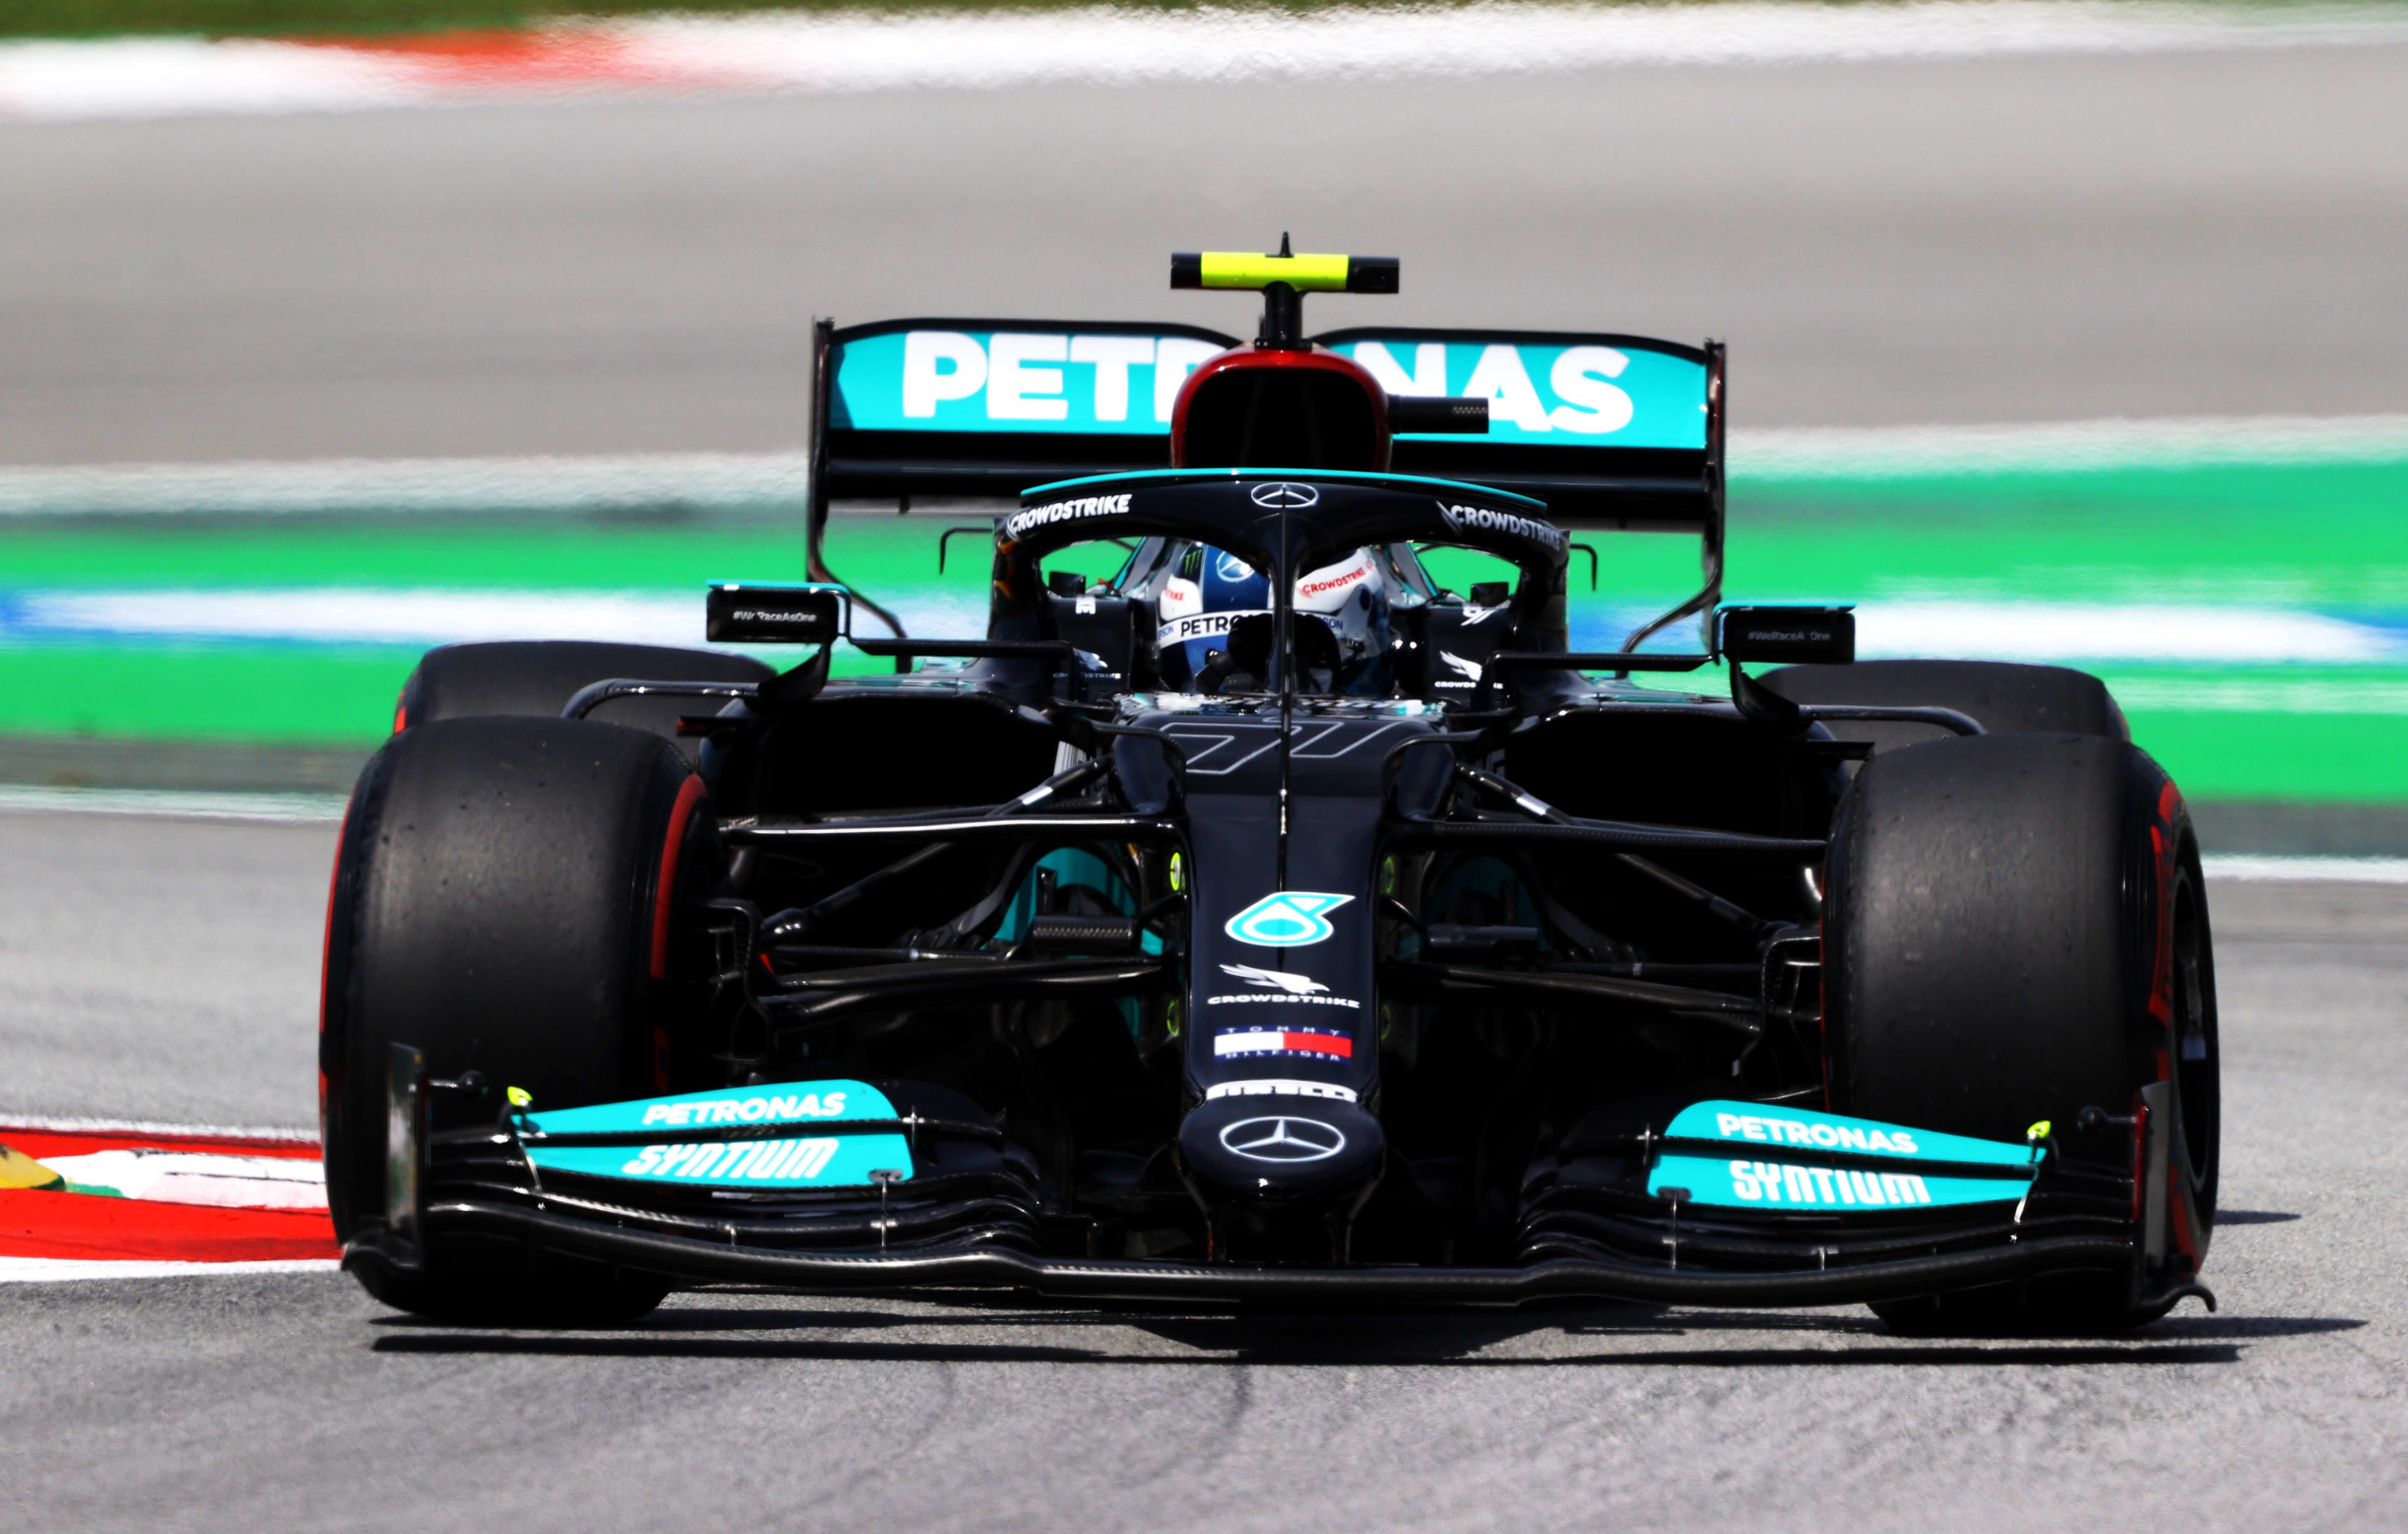 2021 Spanish Grand Prix Fp1 Report And Highlights Bottas Tops First Practice In Spain For Mercedes Ahead Of Verstappen And Hamilton Formula 1